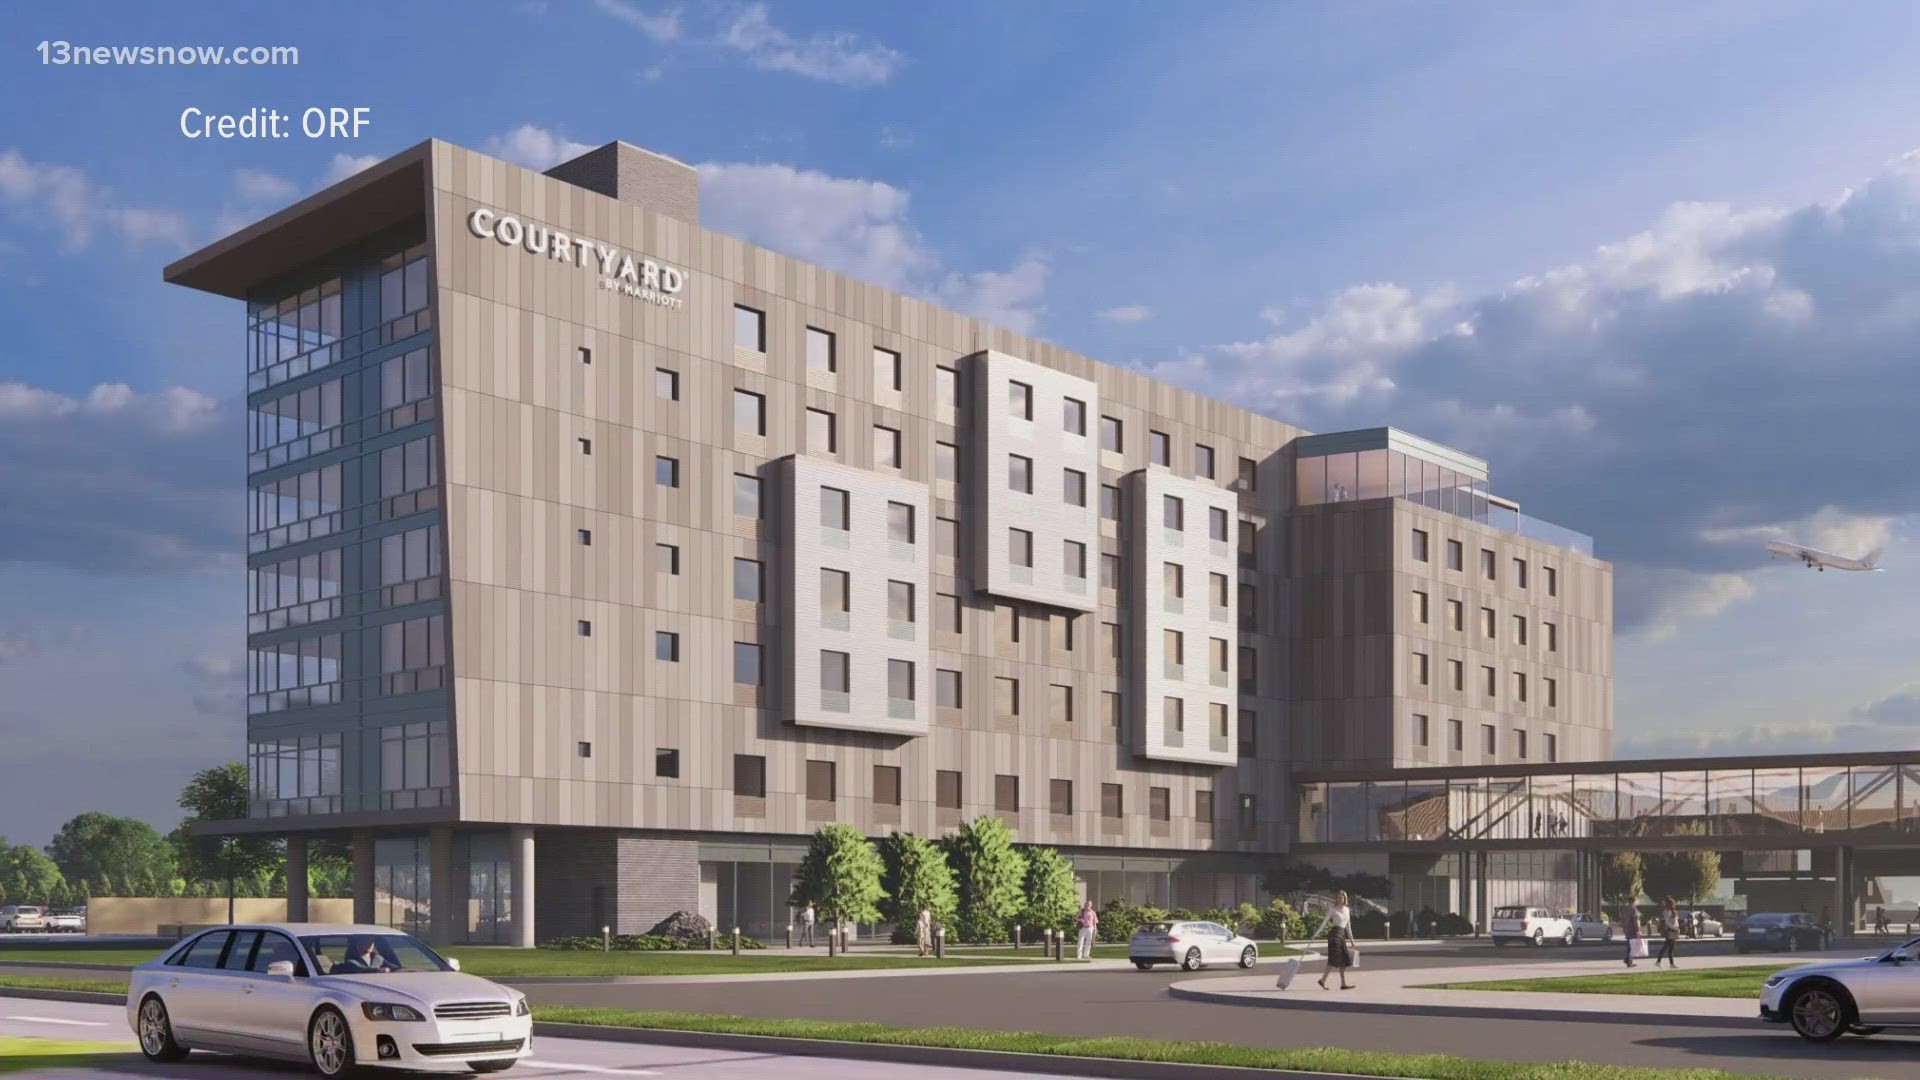 Airport officials say the proposed hotel, a seven-story Courtyard Marriott, is set to feature a fitness center, meeting rooms and a rooftop bar.